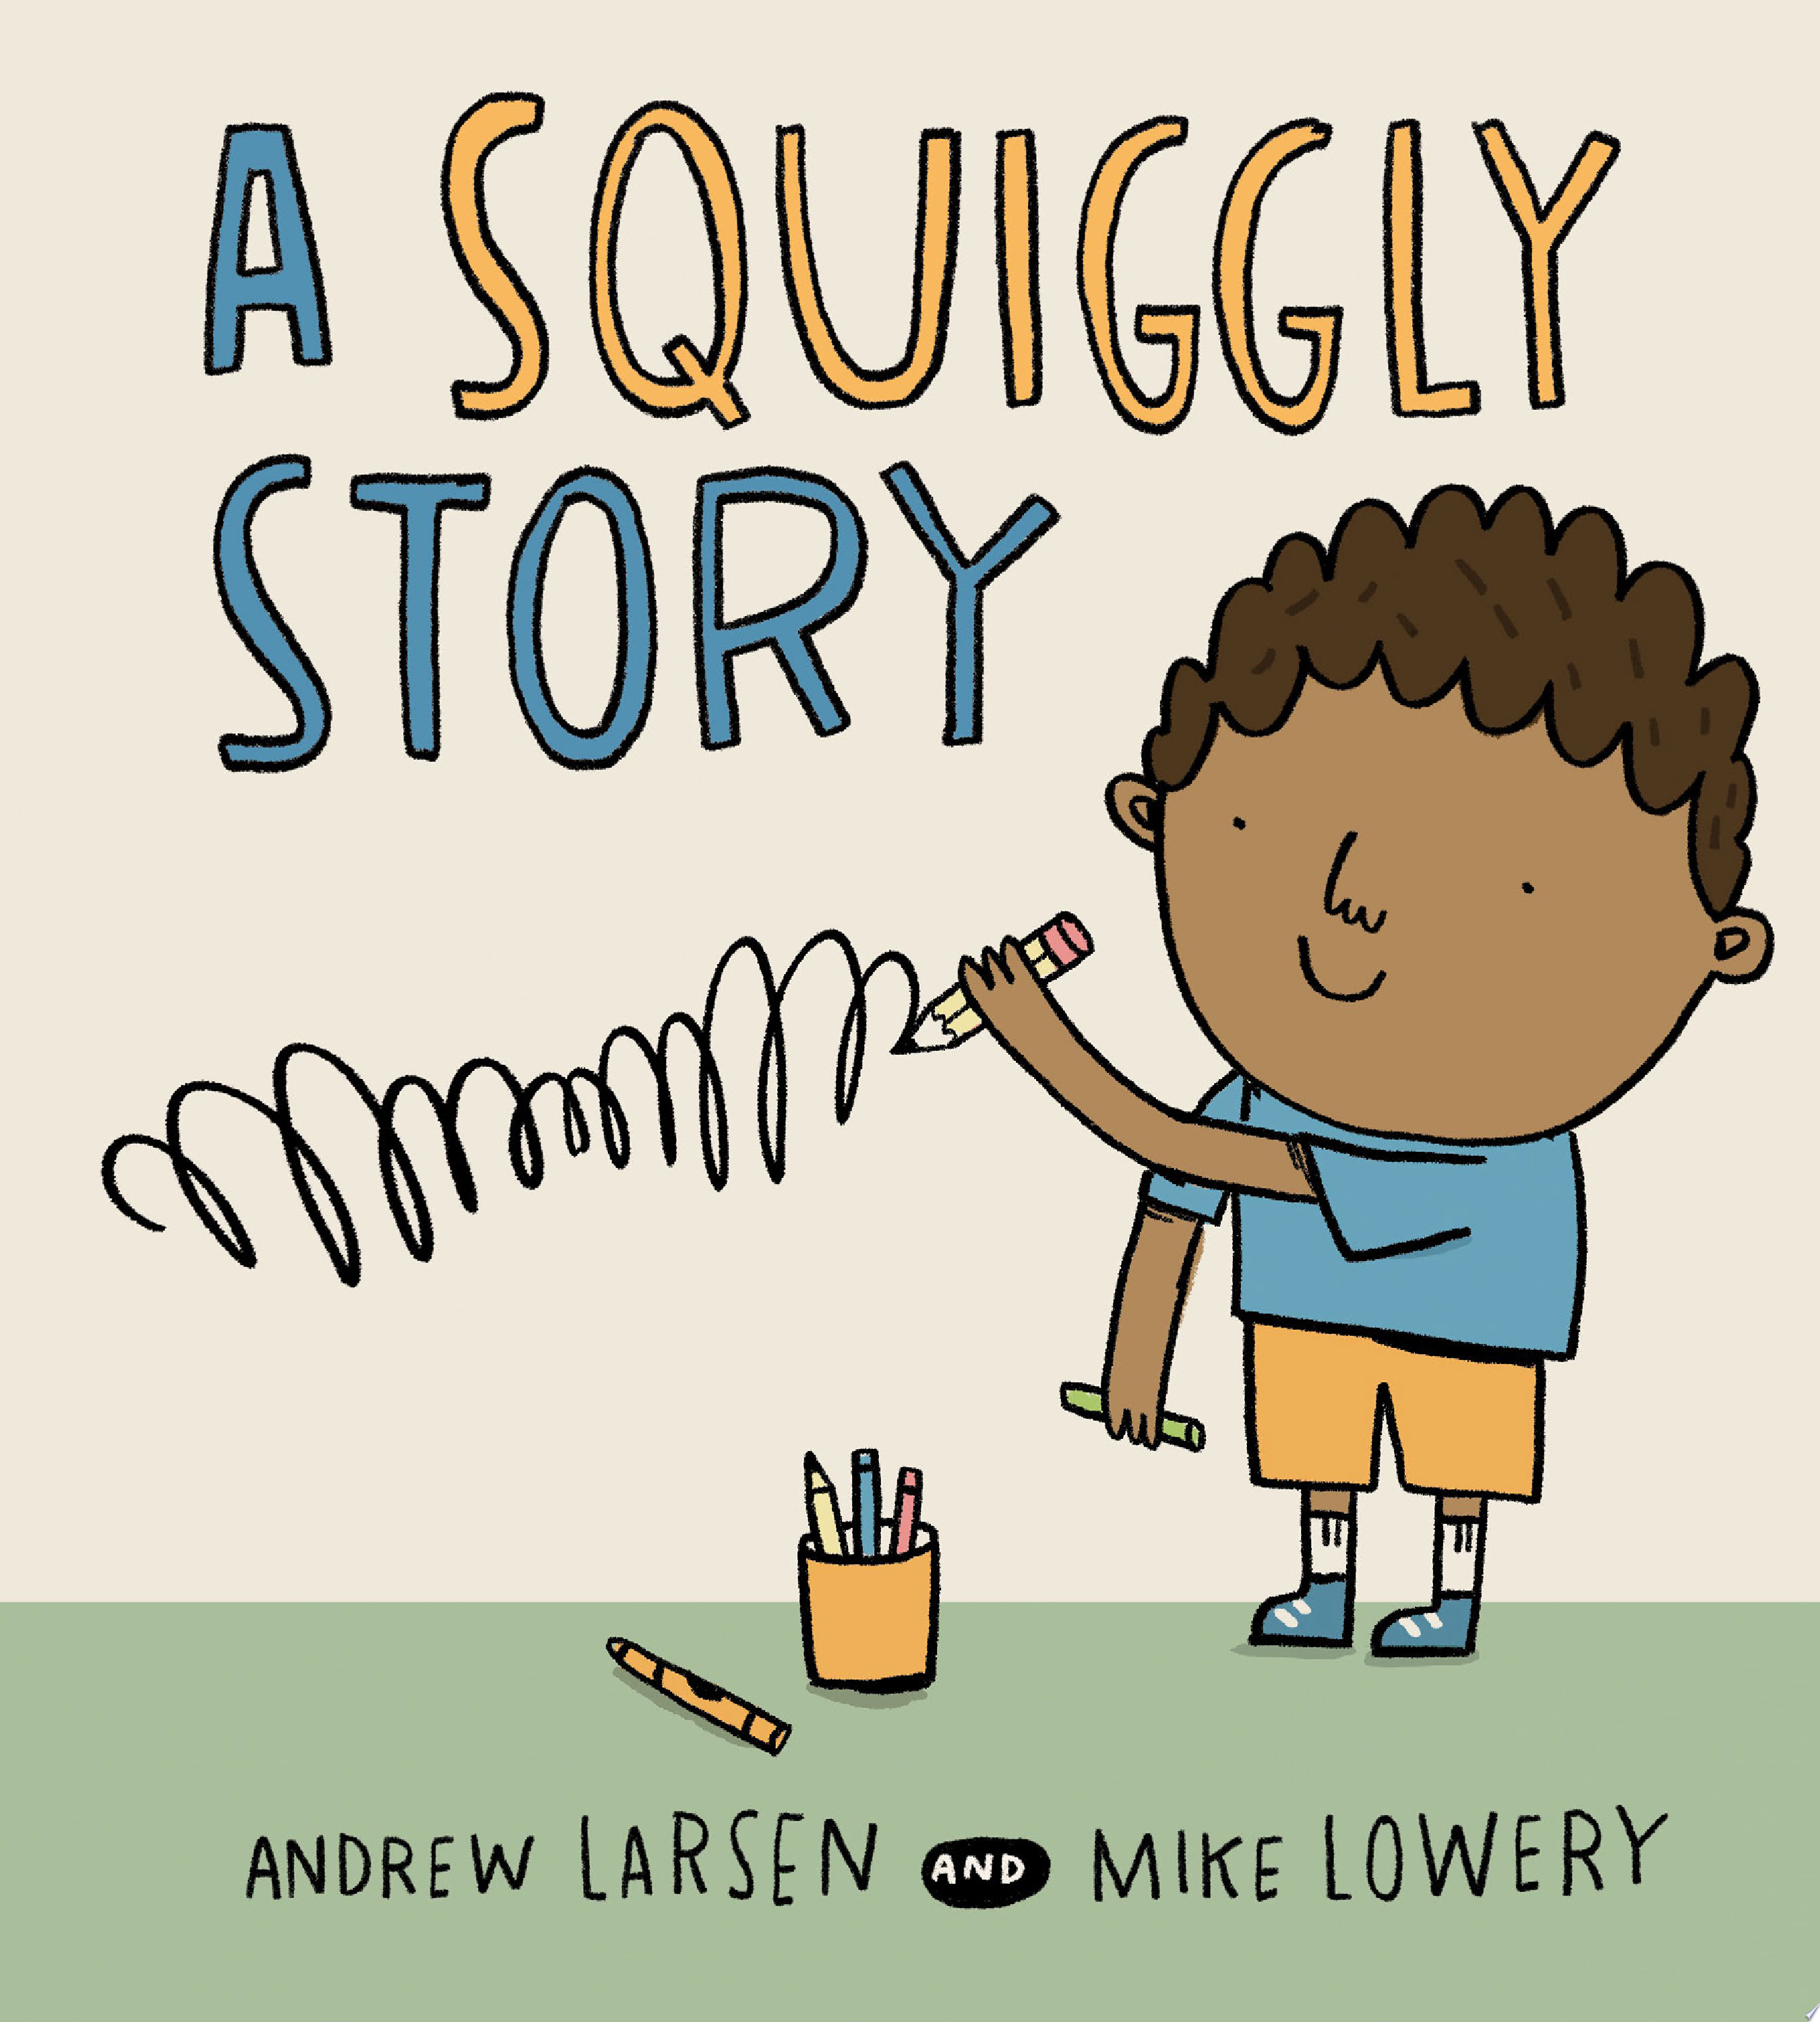 Image for "A Squiggly Story"